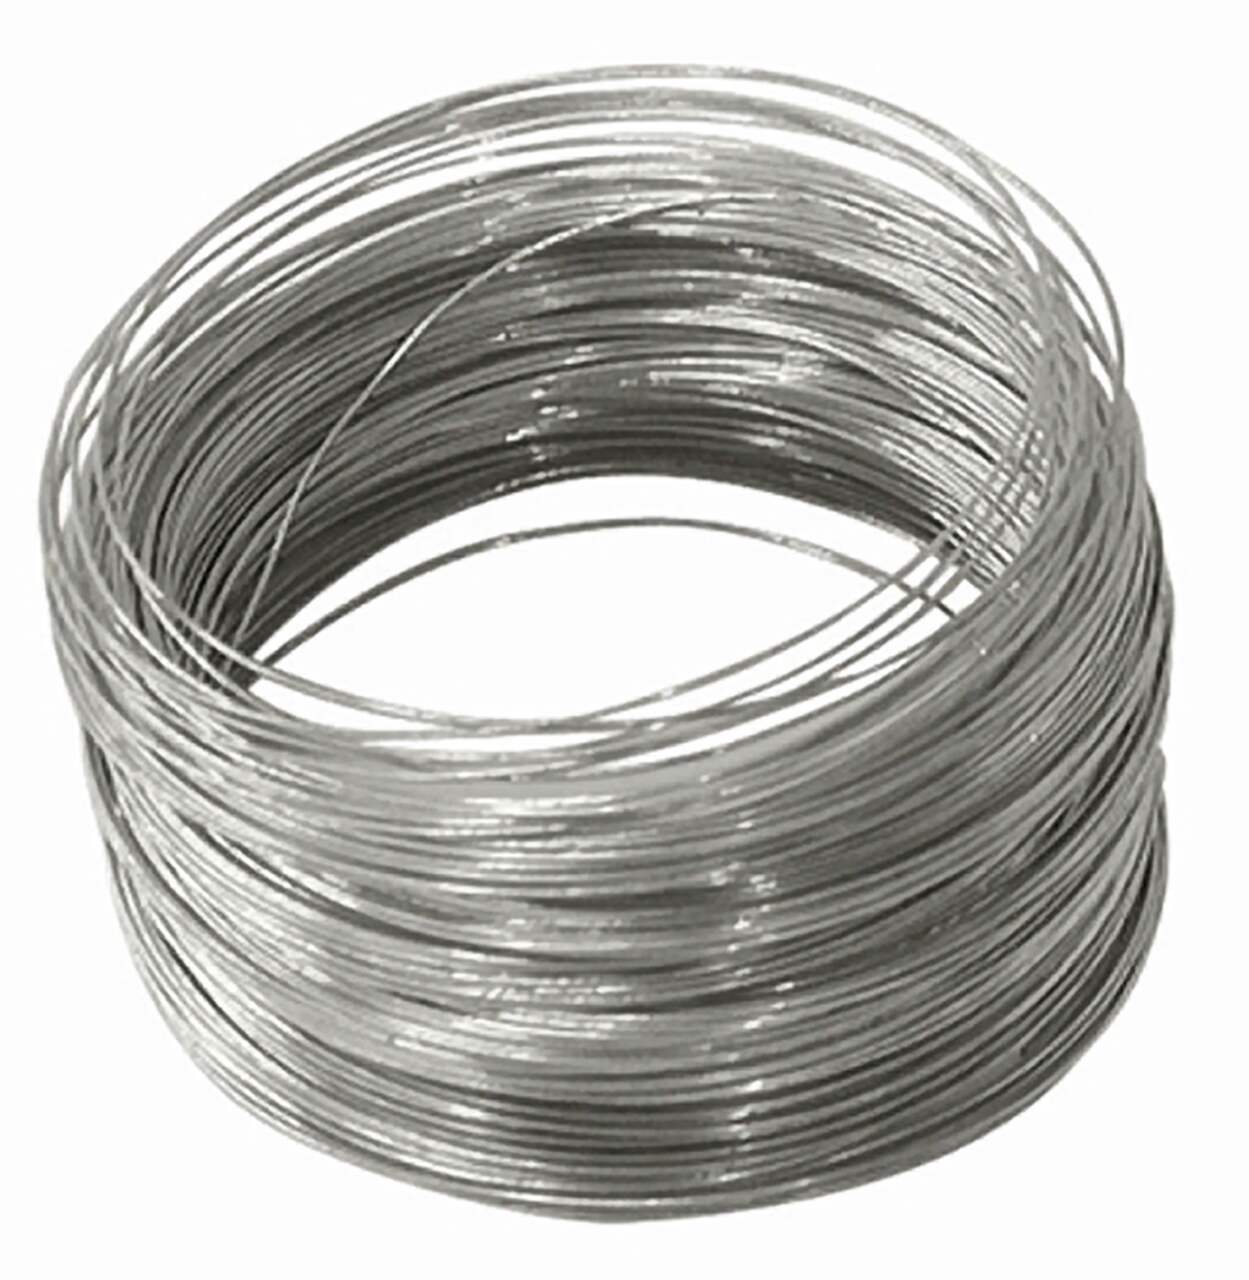 Hillman 28 Gauge Galvanized Wire, Self-Tying, So-ft and Flexible , 100-ft